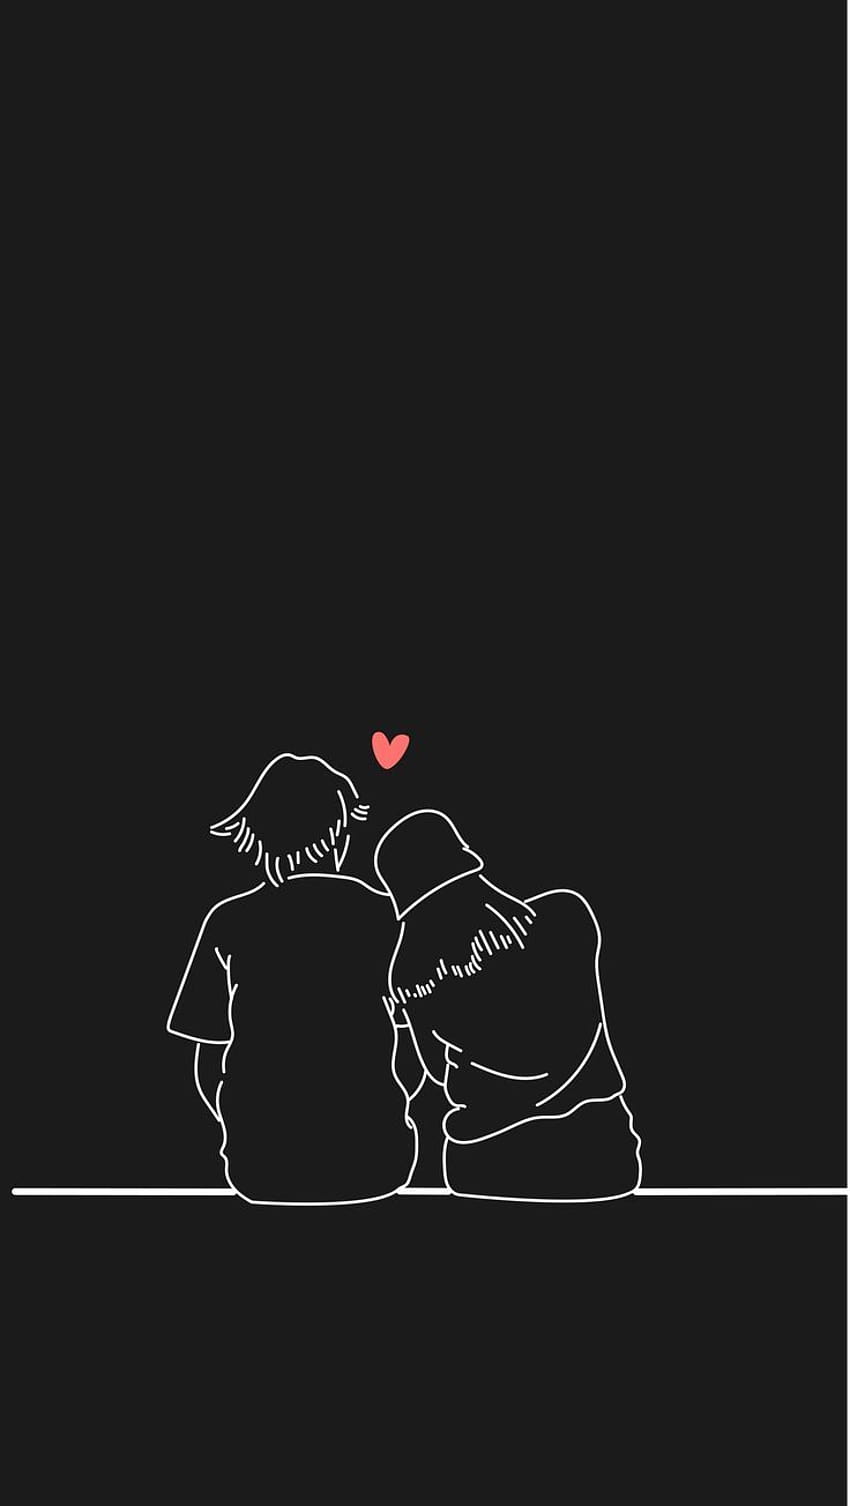 Love couple minimal illustration by Piyusraws in 2022, lover black and white 2022 HD phone wallpaper